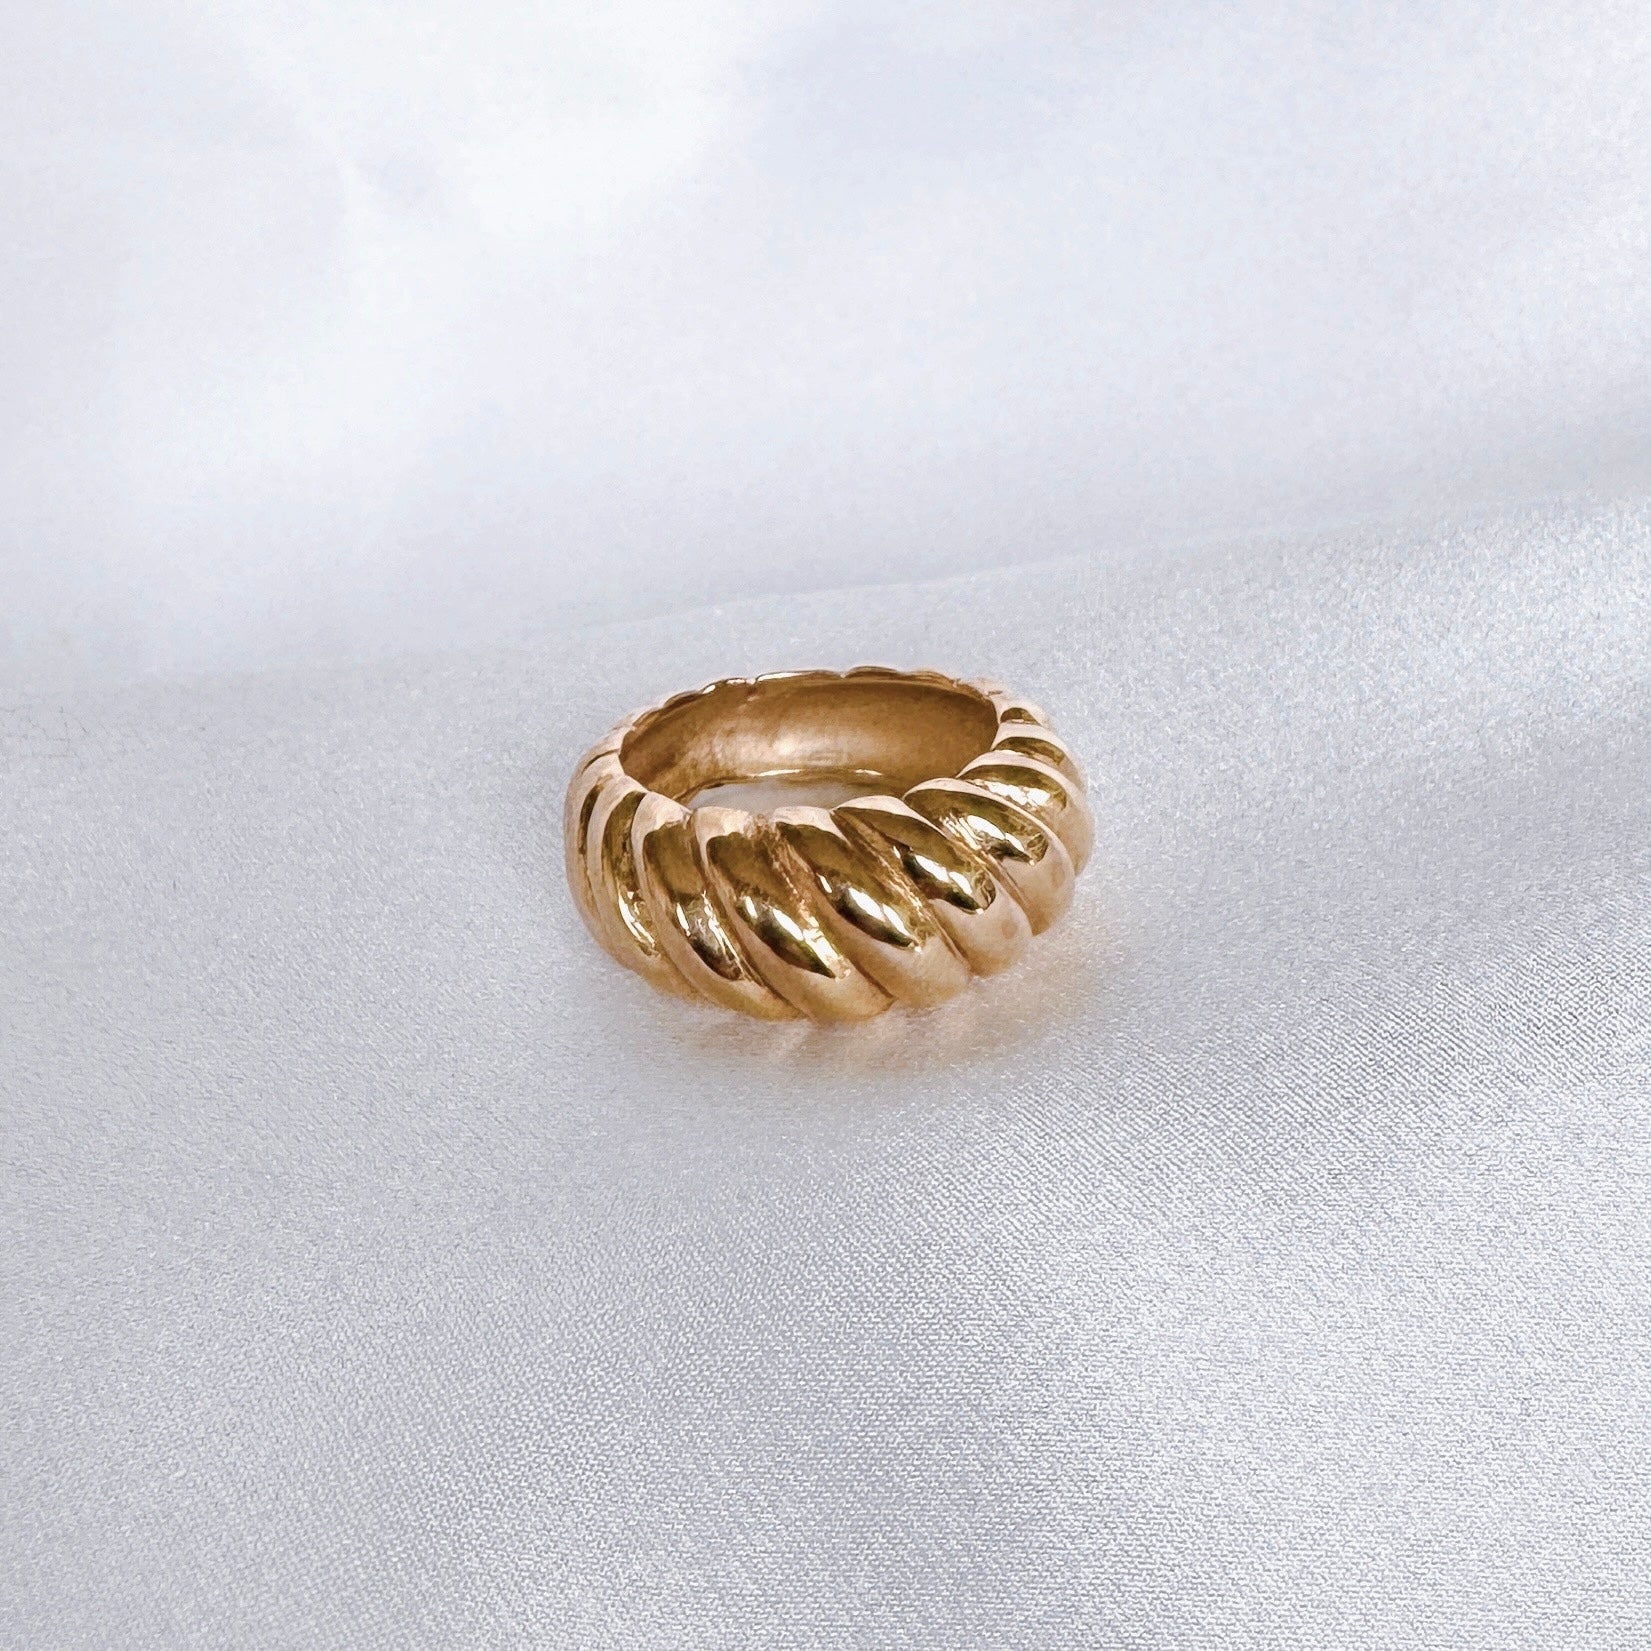 Gold-plated “Stephanie” ring